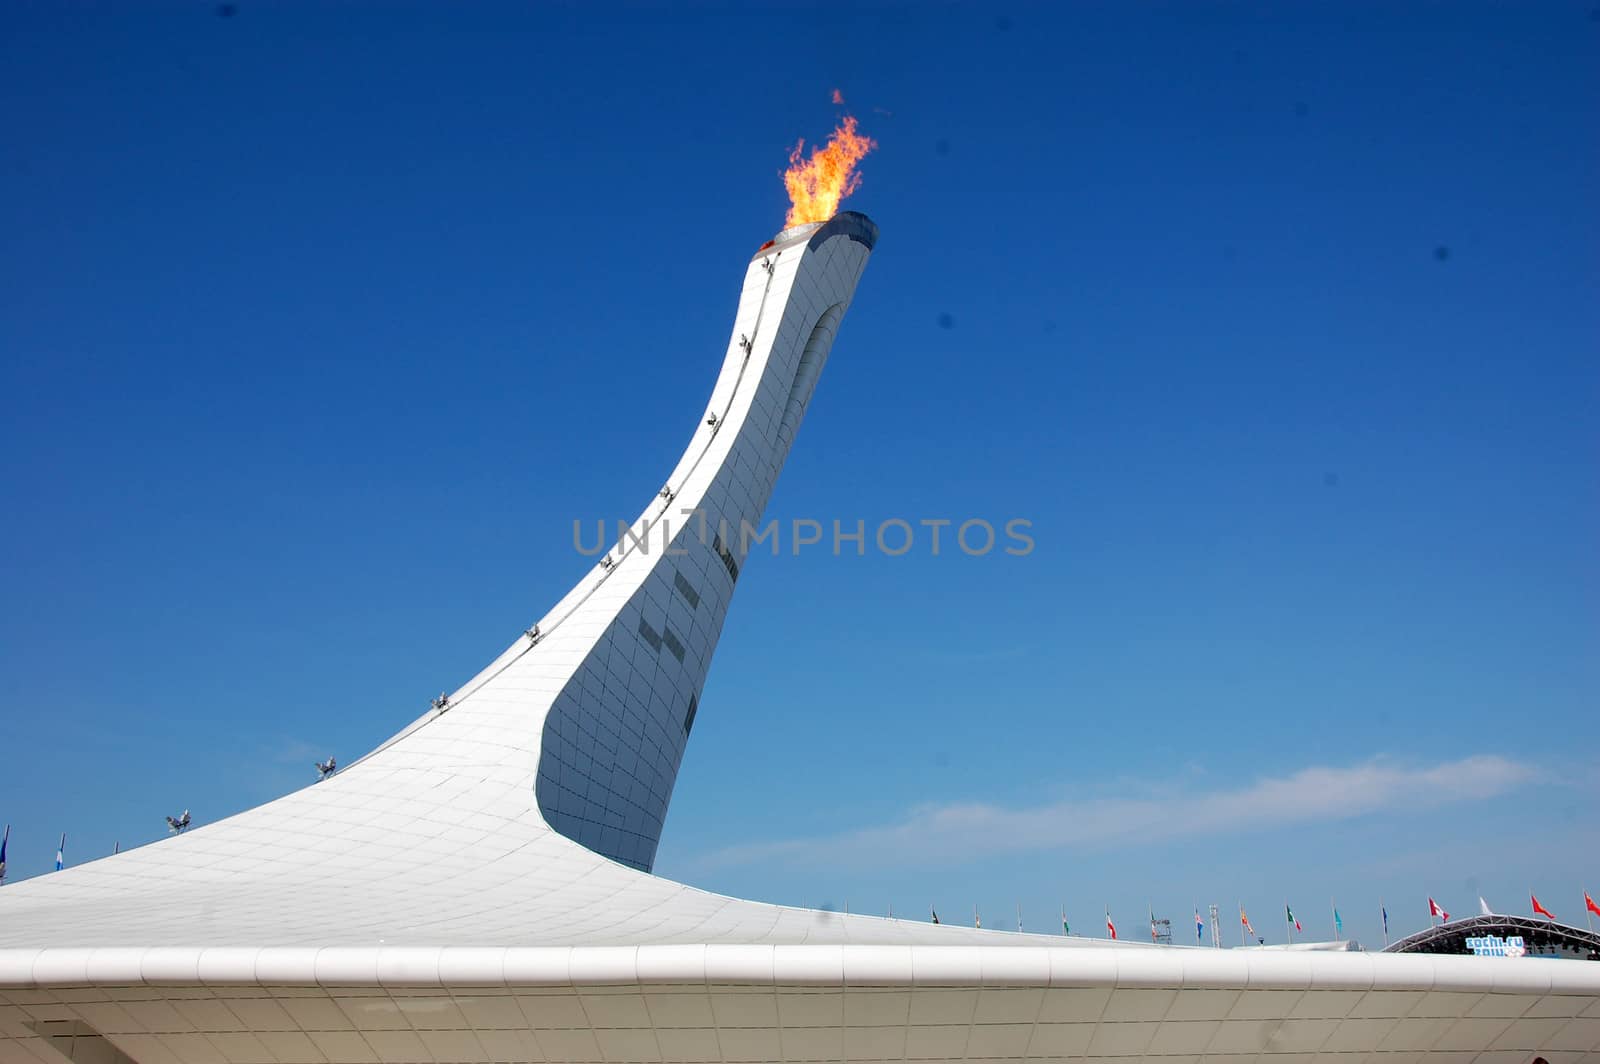 Olympic fire at XXII Winter Olympic Games Sochi 2014, Russia